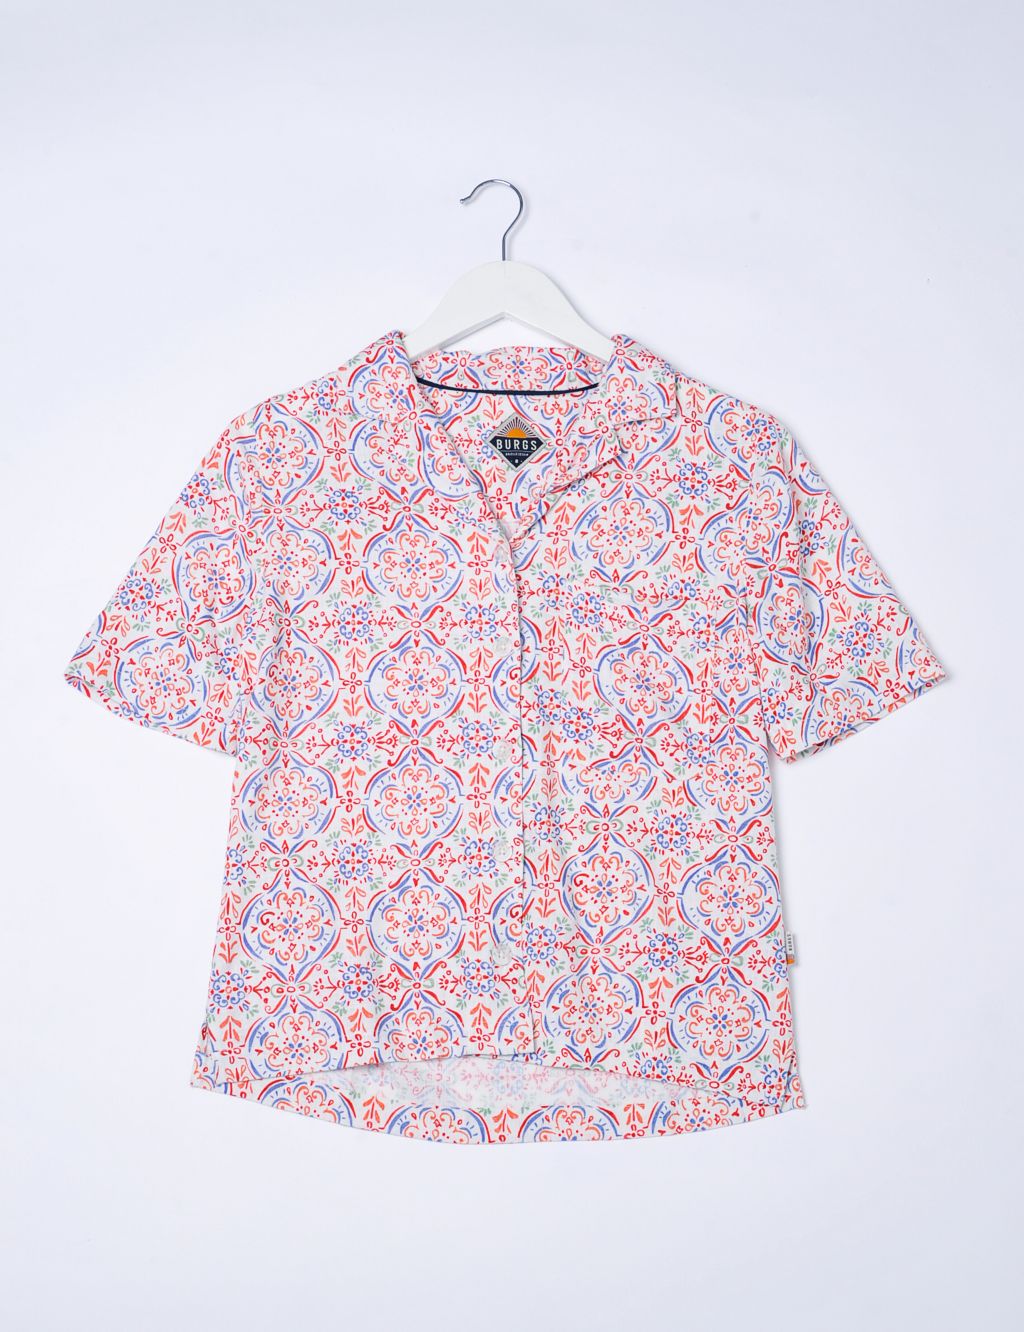 Linen Blend Printed Collared Relaxed Shirt image 2